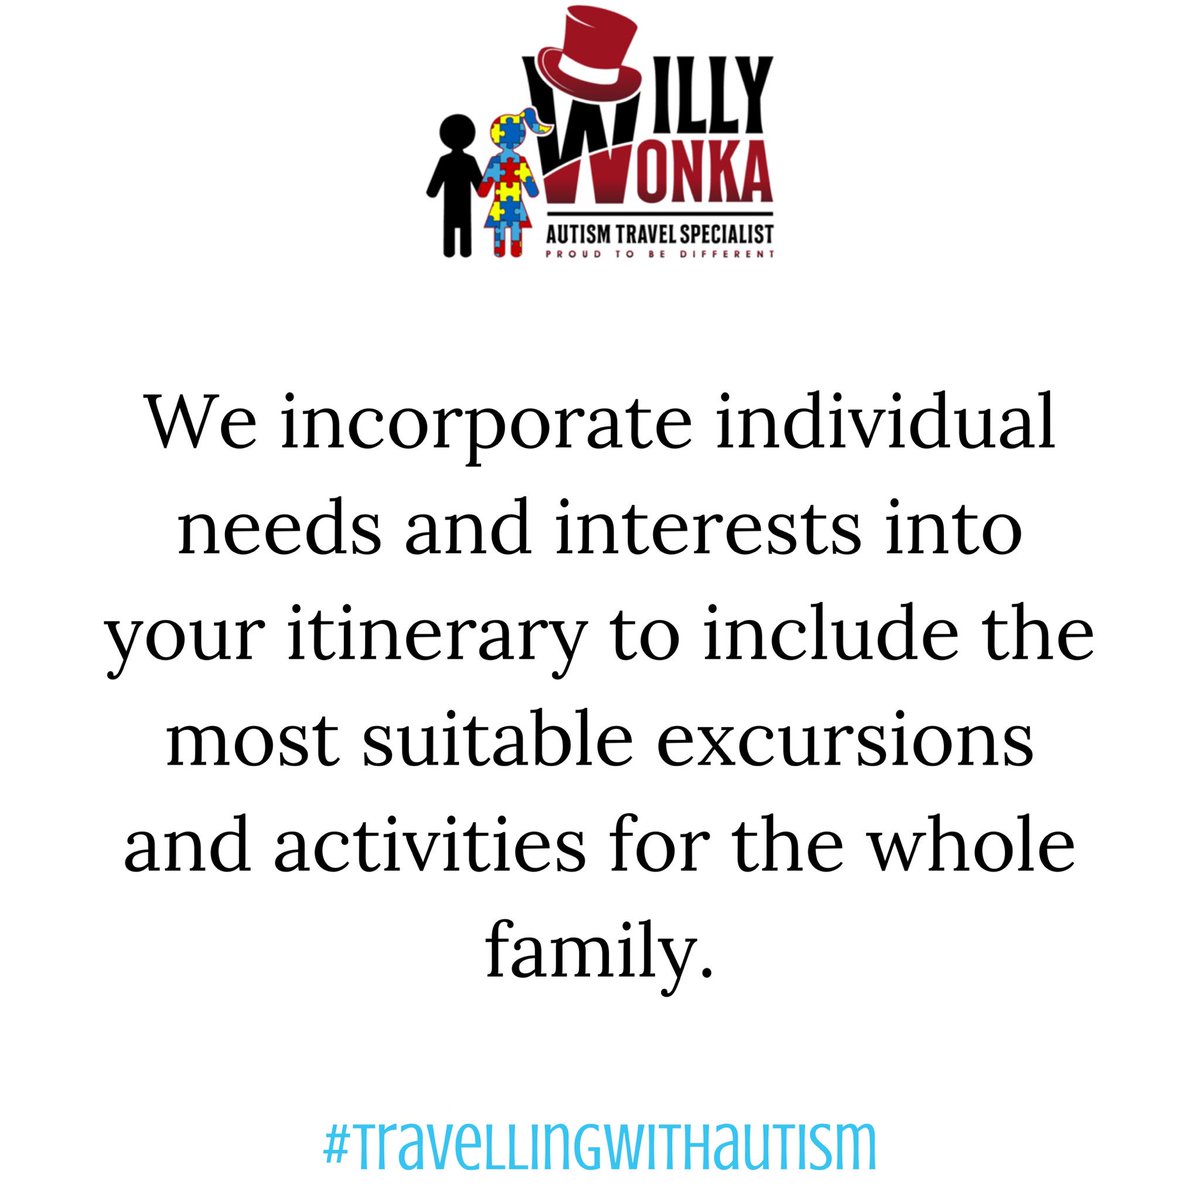 We can arrange a variety of activities to keep everyone happy. With a full visual itinerary supplied before departure, every family member will know in advance where you will be going and what to expect.
If you can dream it, we can do it!
#travellingwithautism #autismtravel